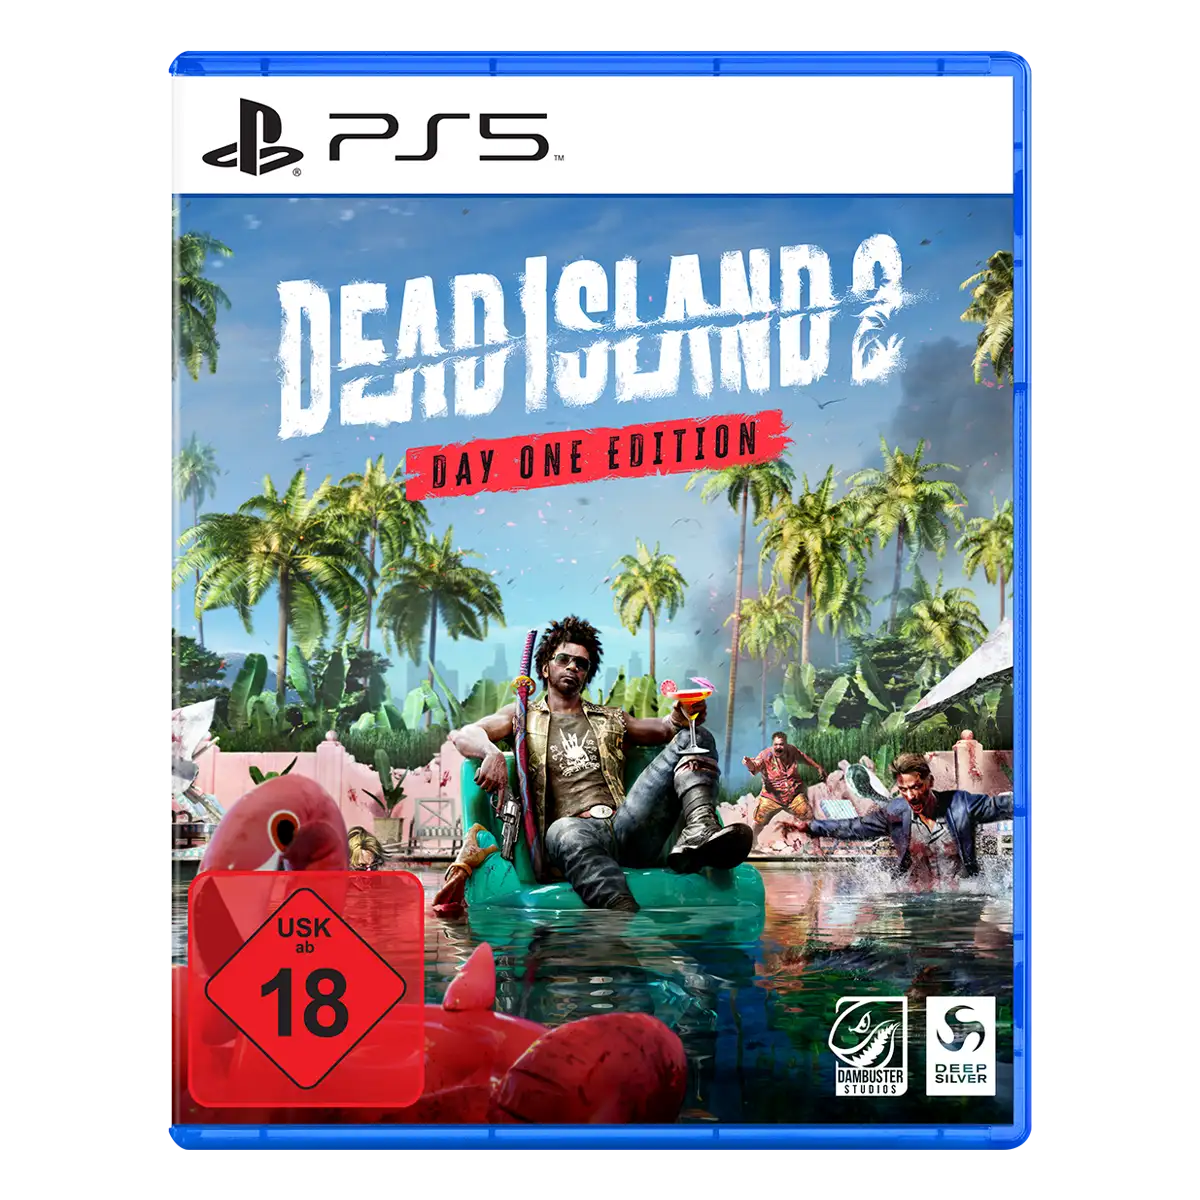 Dead Island 2 Day One Edition (PS5) (USK)